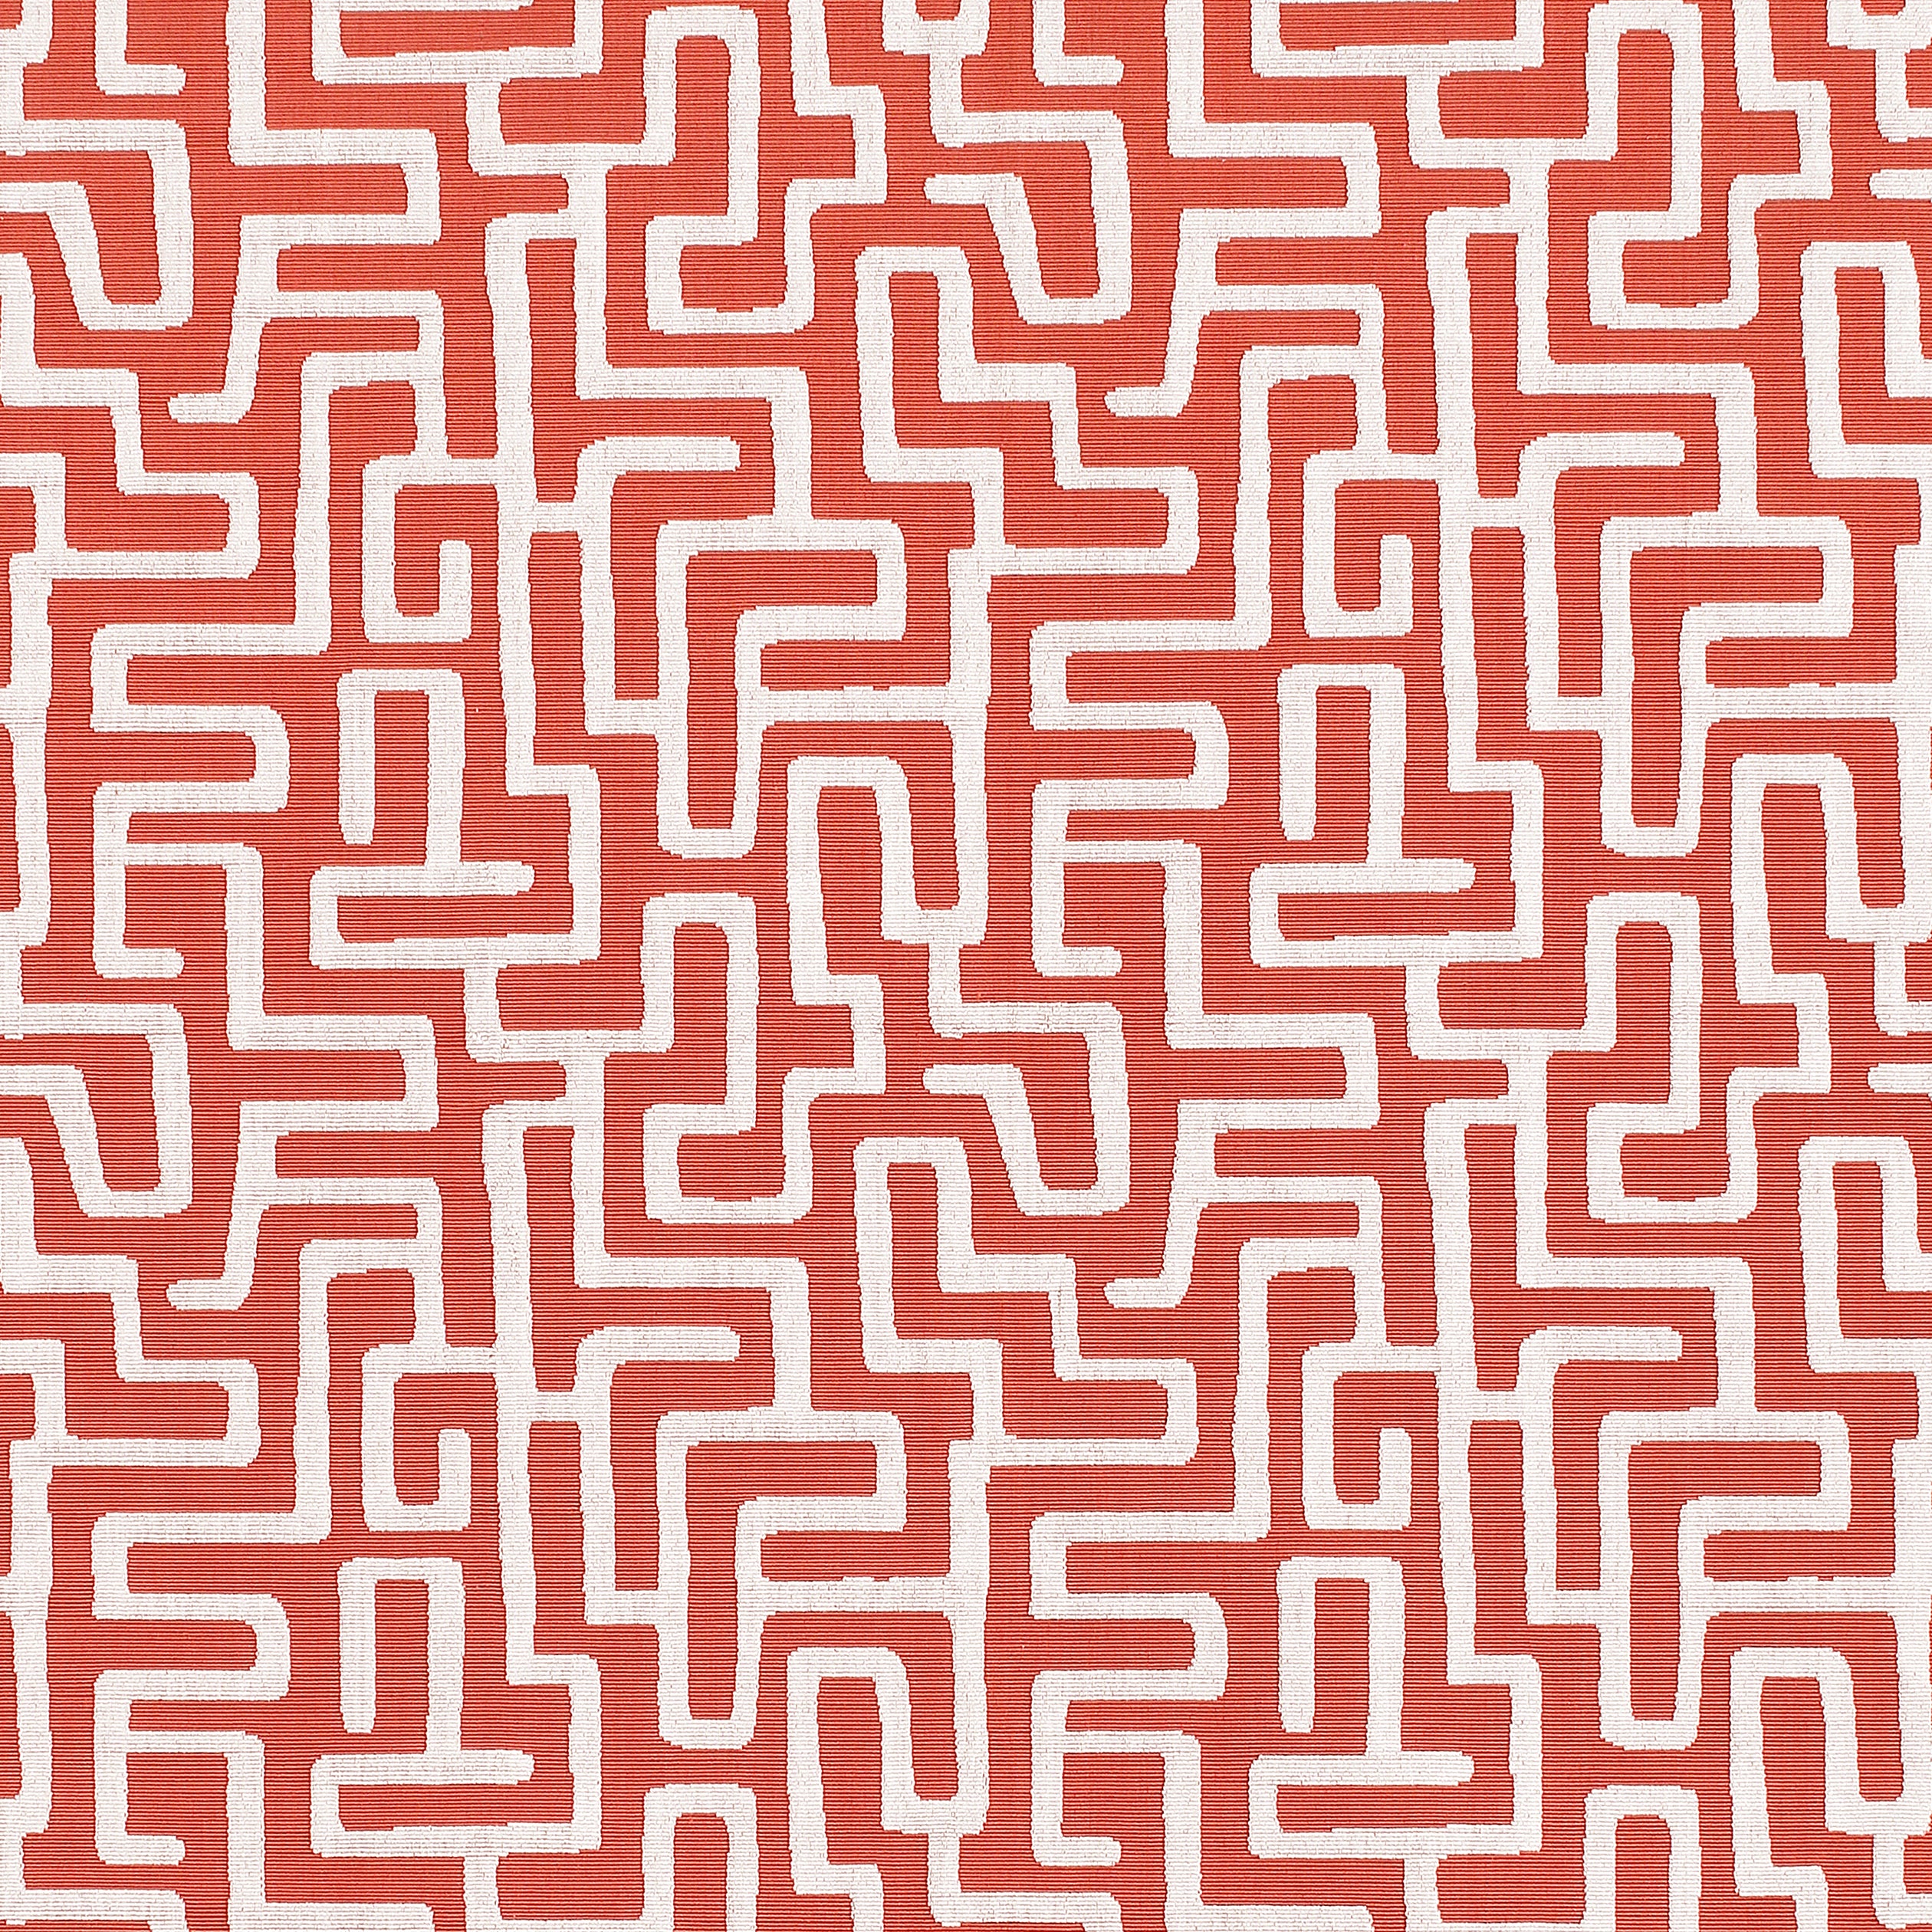 Terrace Lane fabric in coral color - pattern number W742029 - by Thibaut in the Sojourn collection